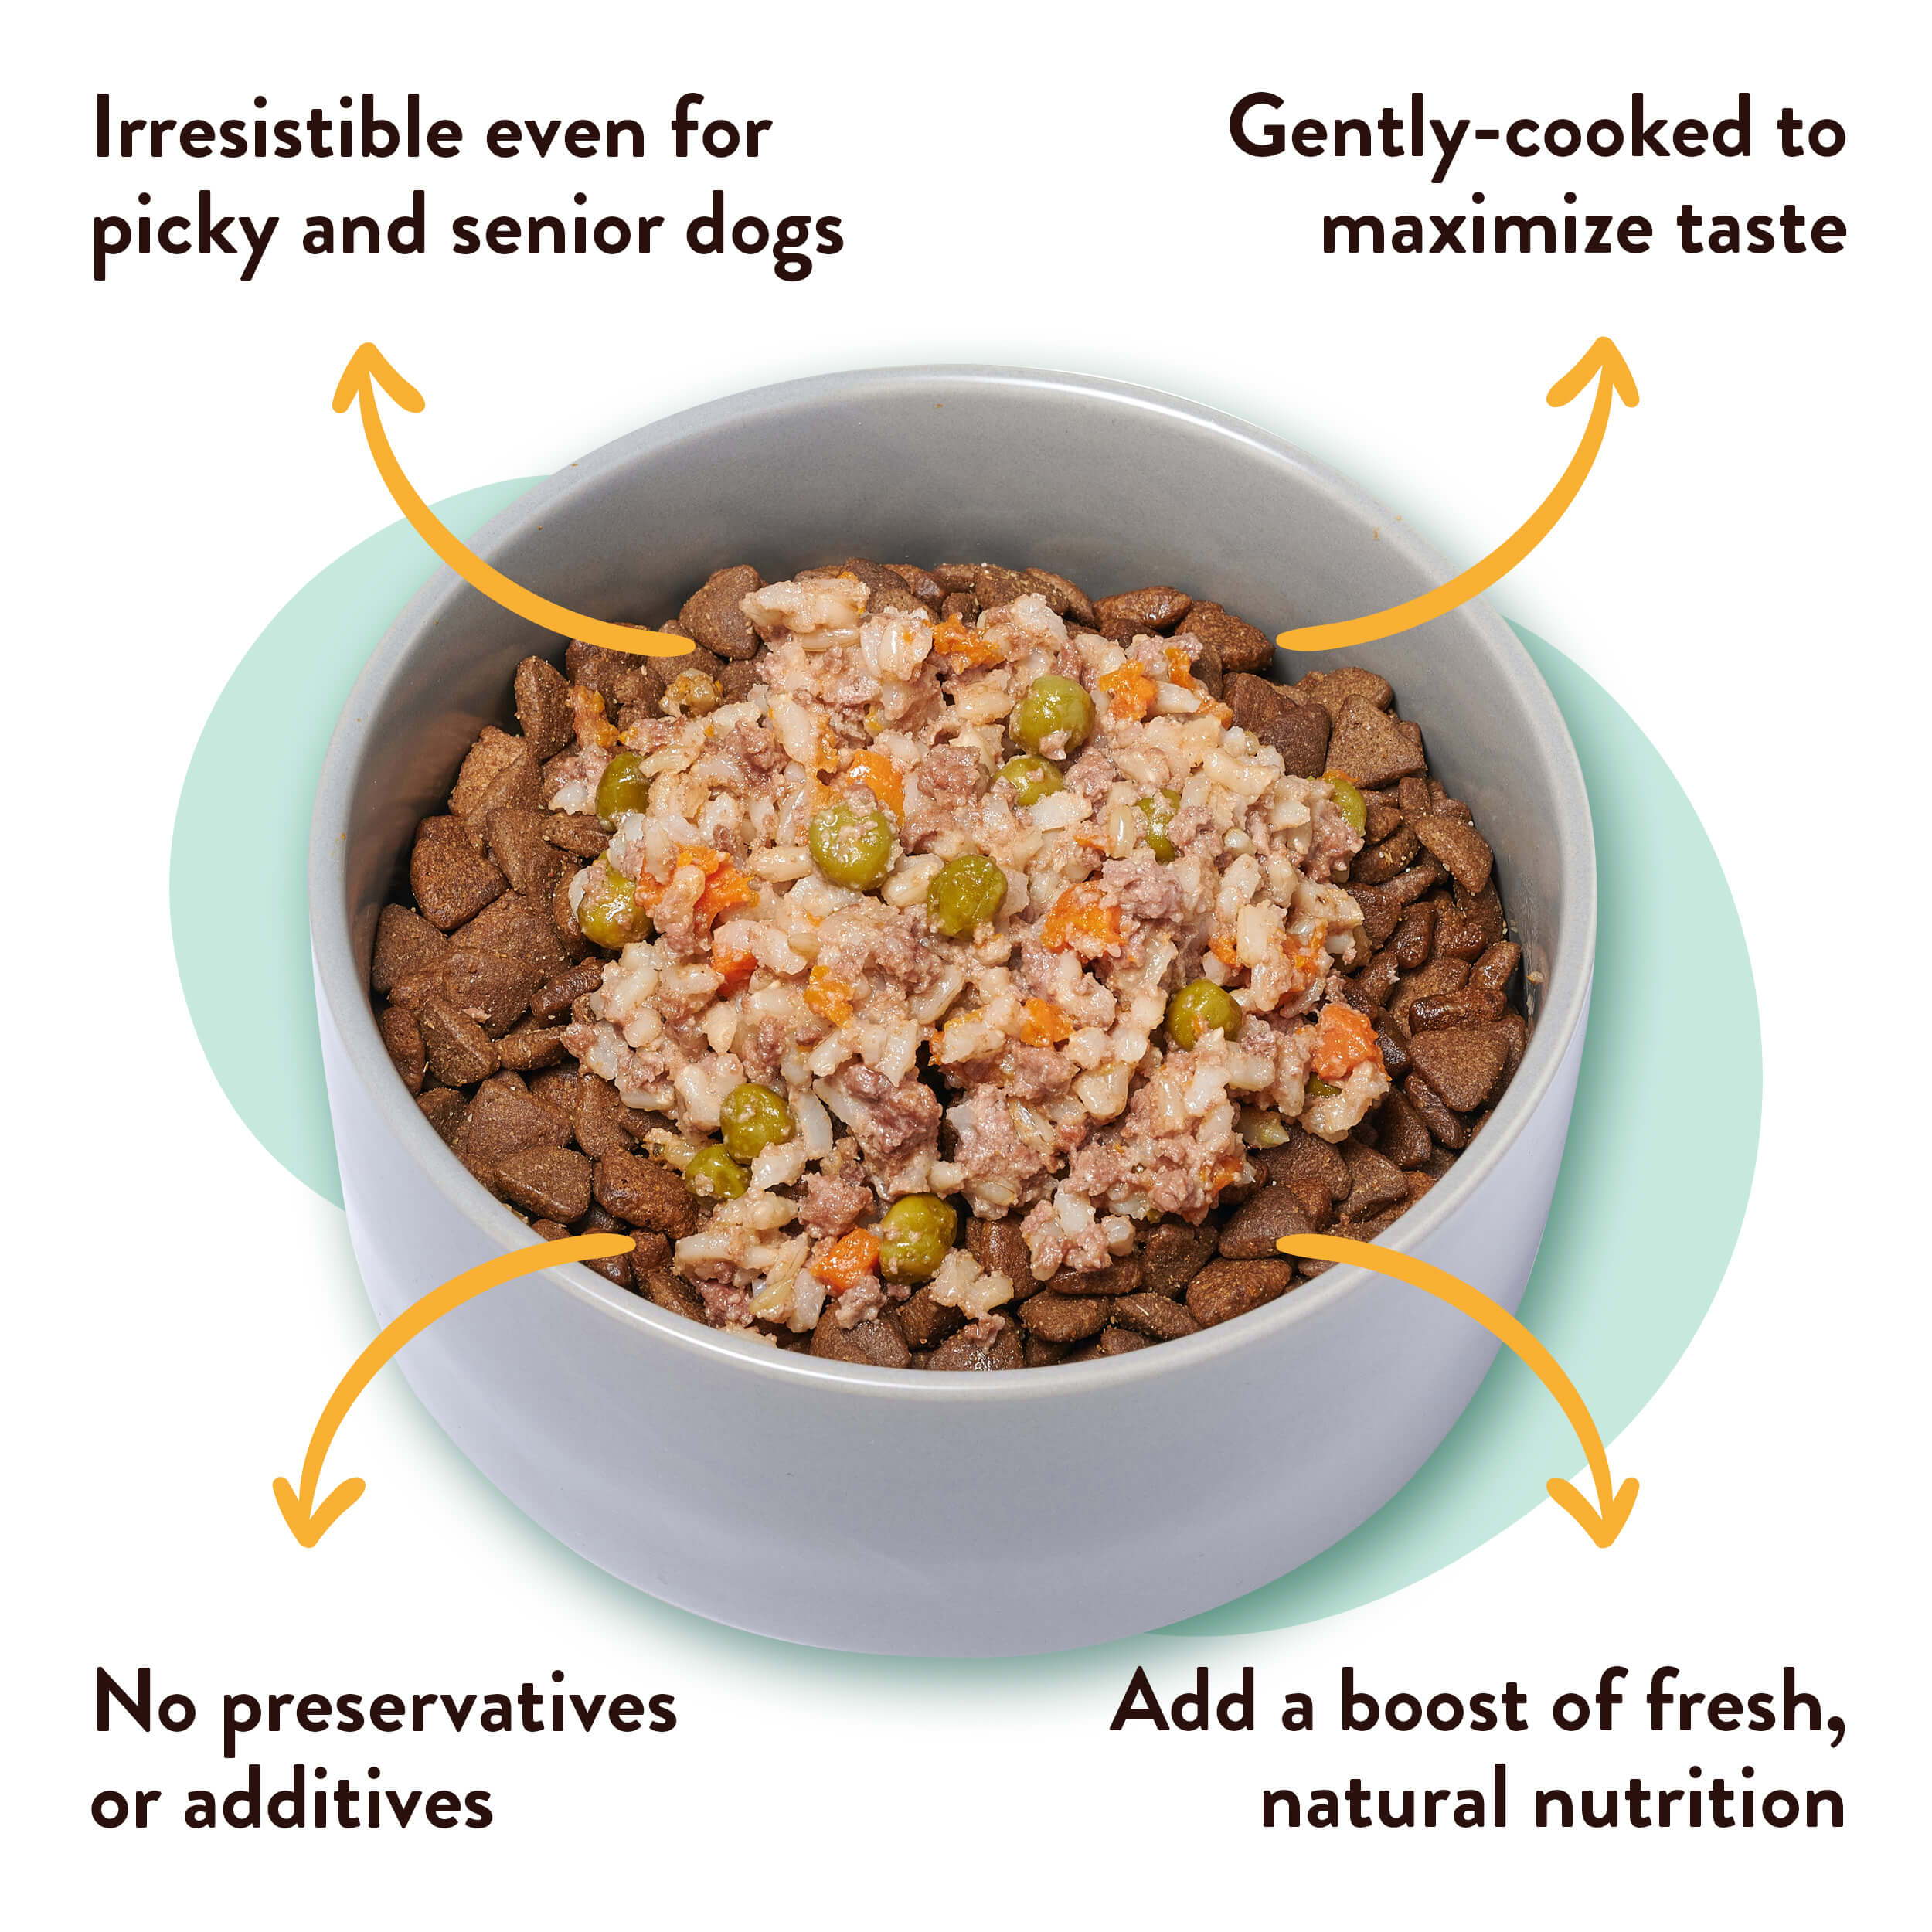 A bowl of Rosie's Beef N' Rice picky dog food